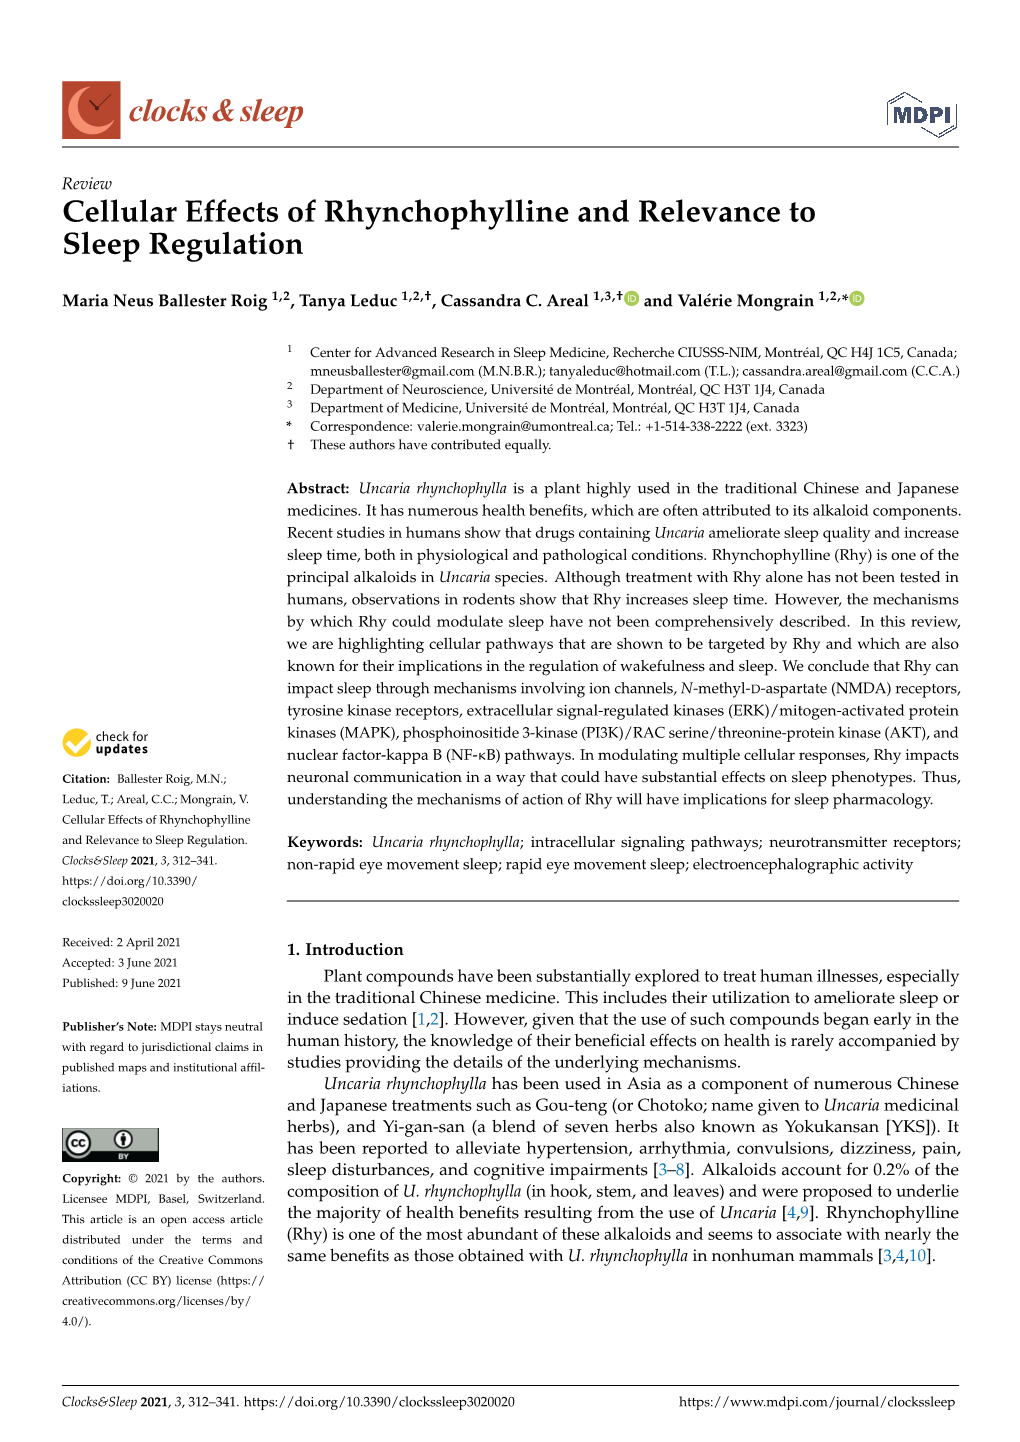 Cellular Effects of Rhynchophylline and Relevance to Sleep Regulation